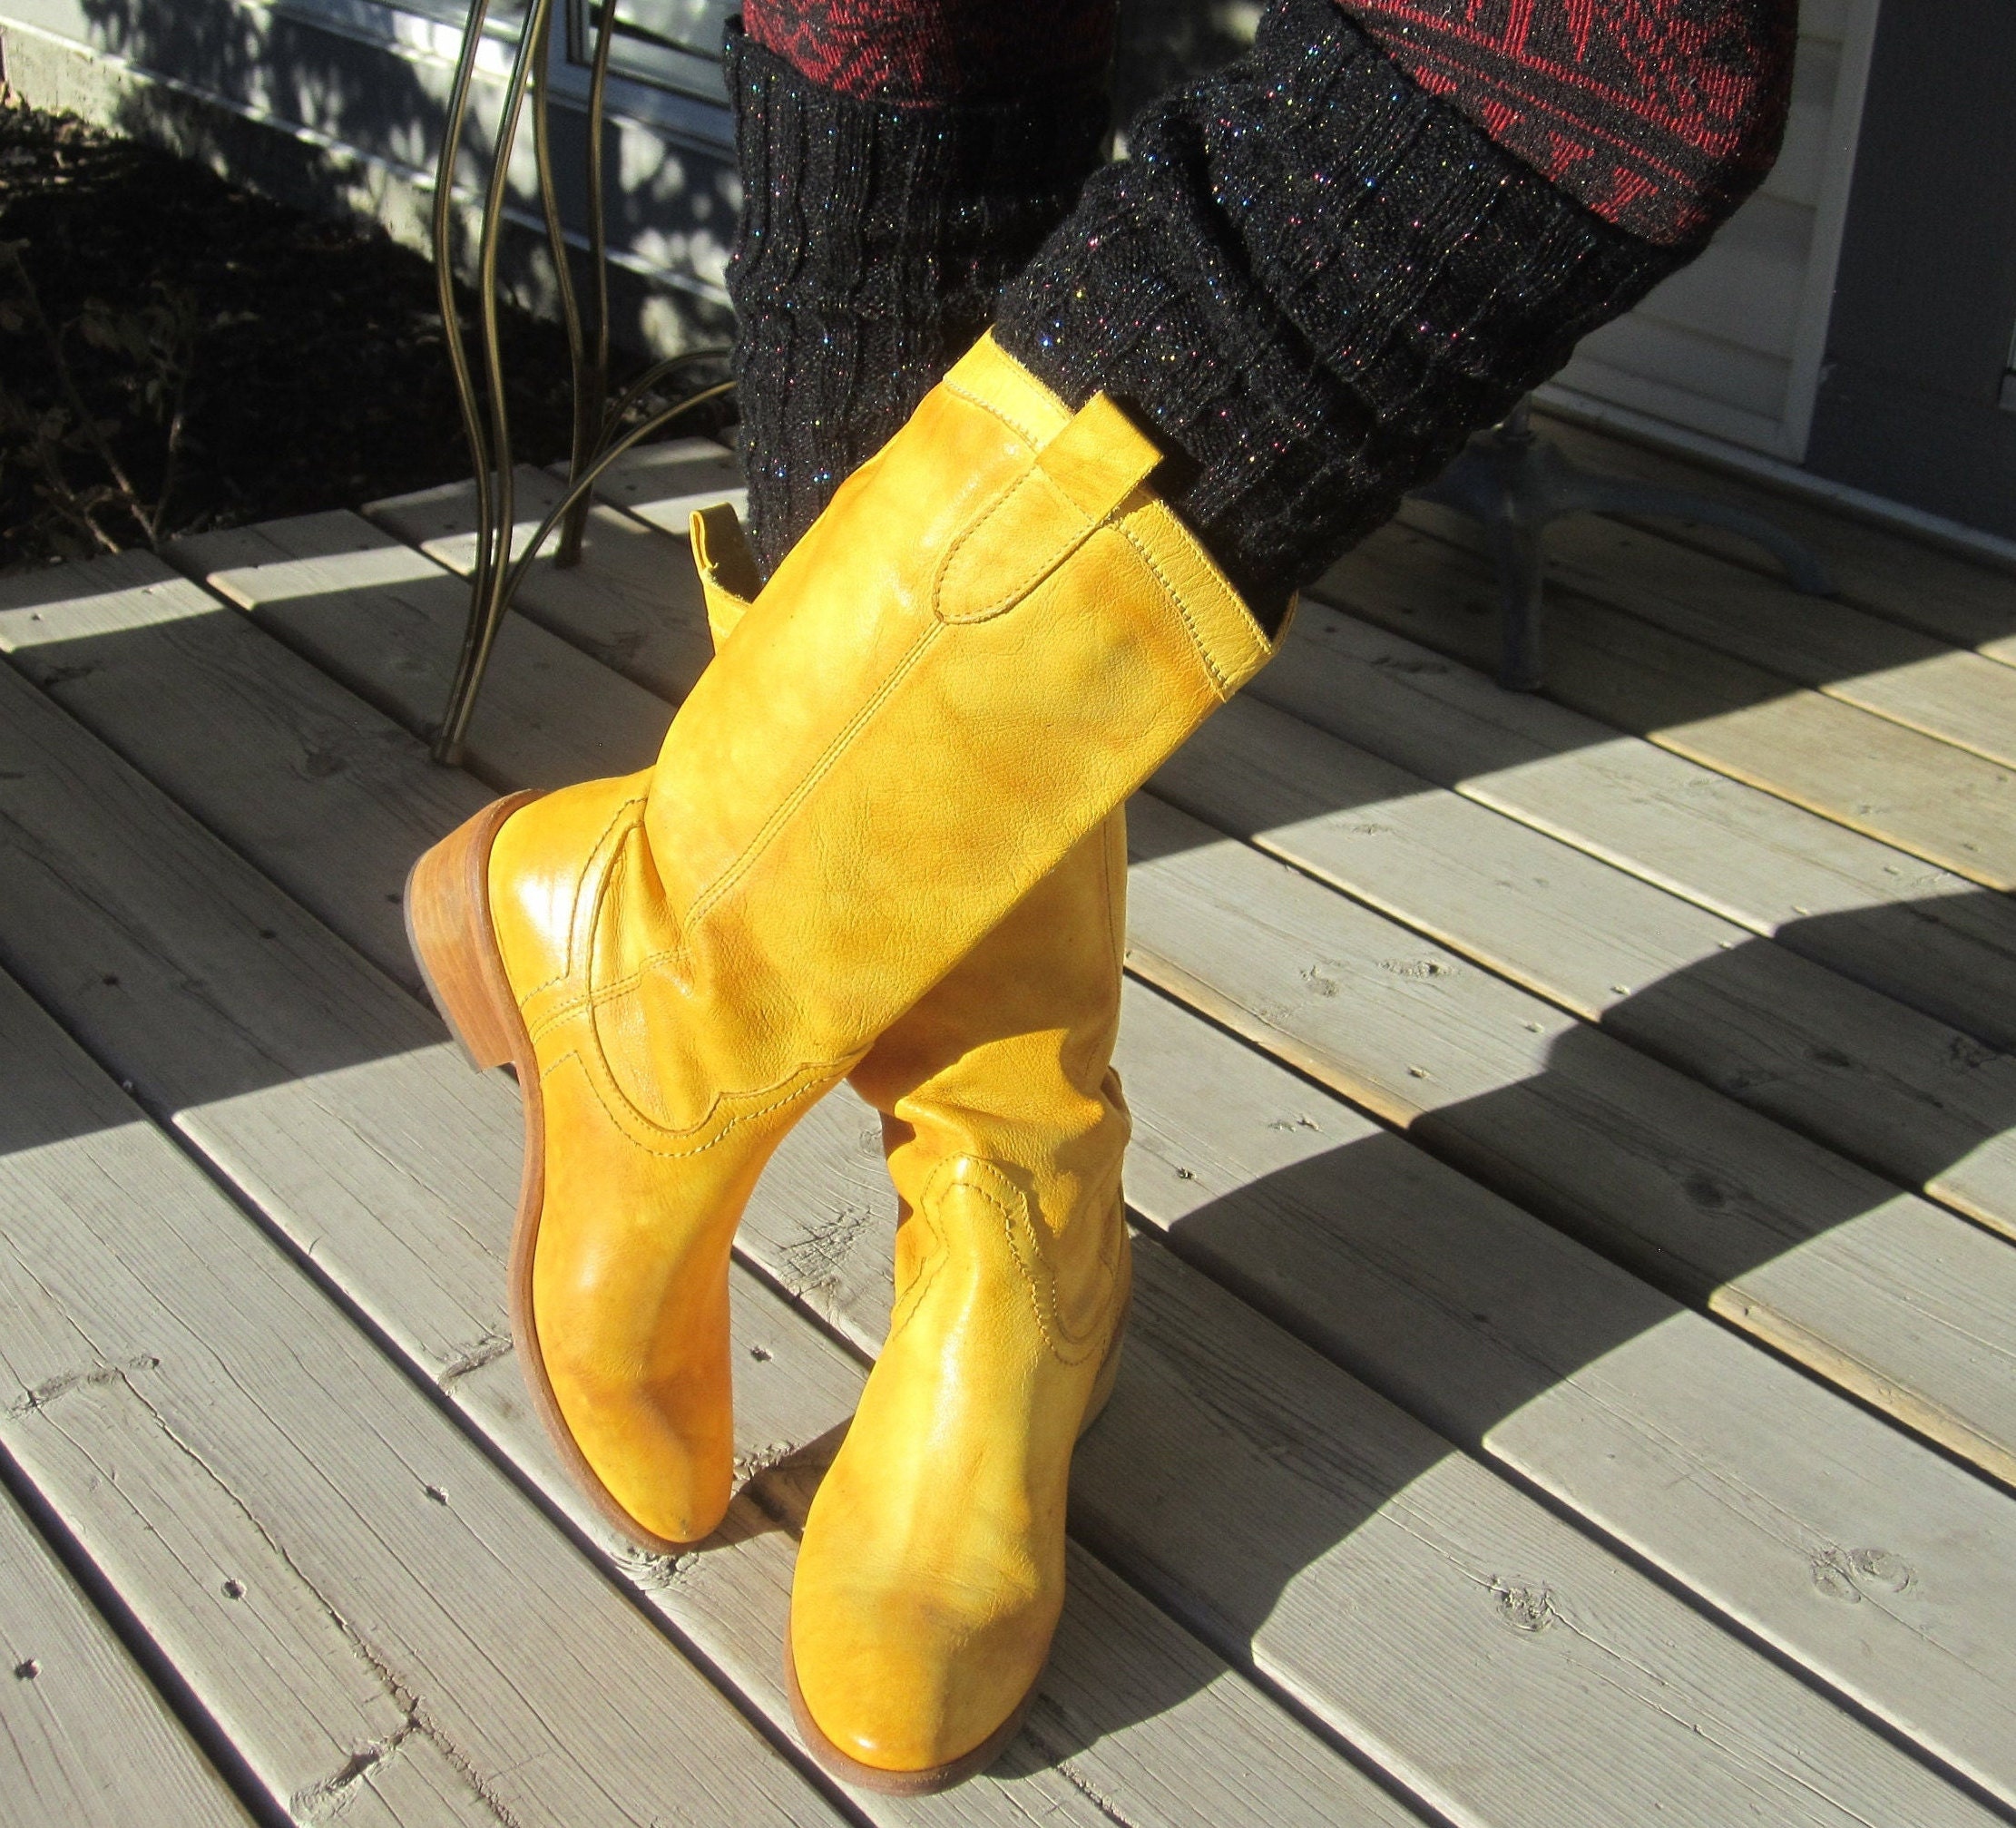 Vintage 70s Tall Retro Boots